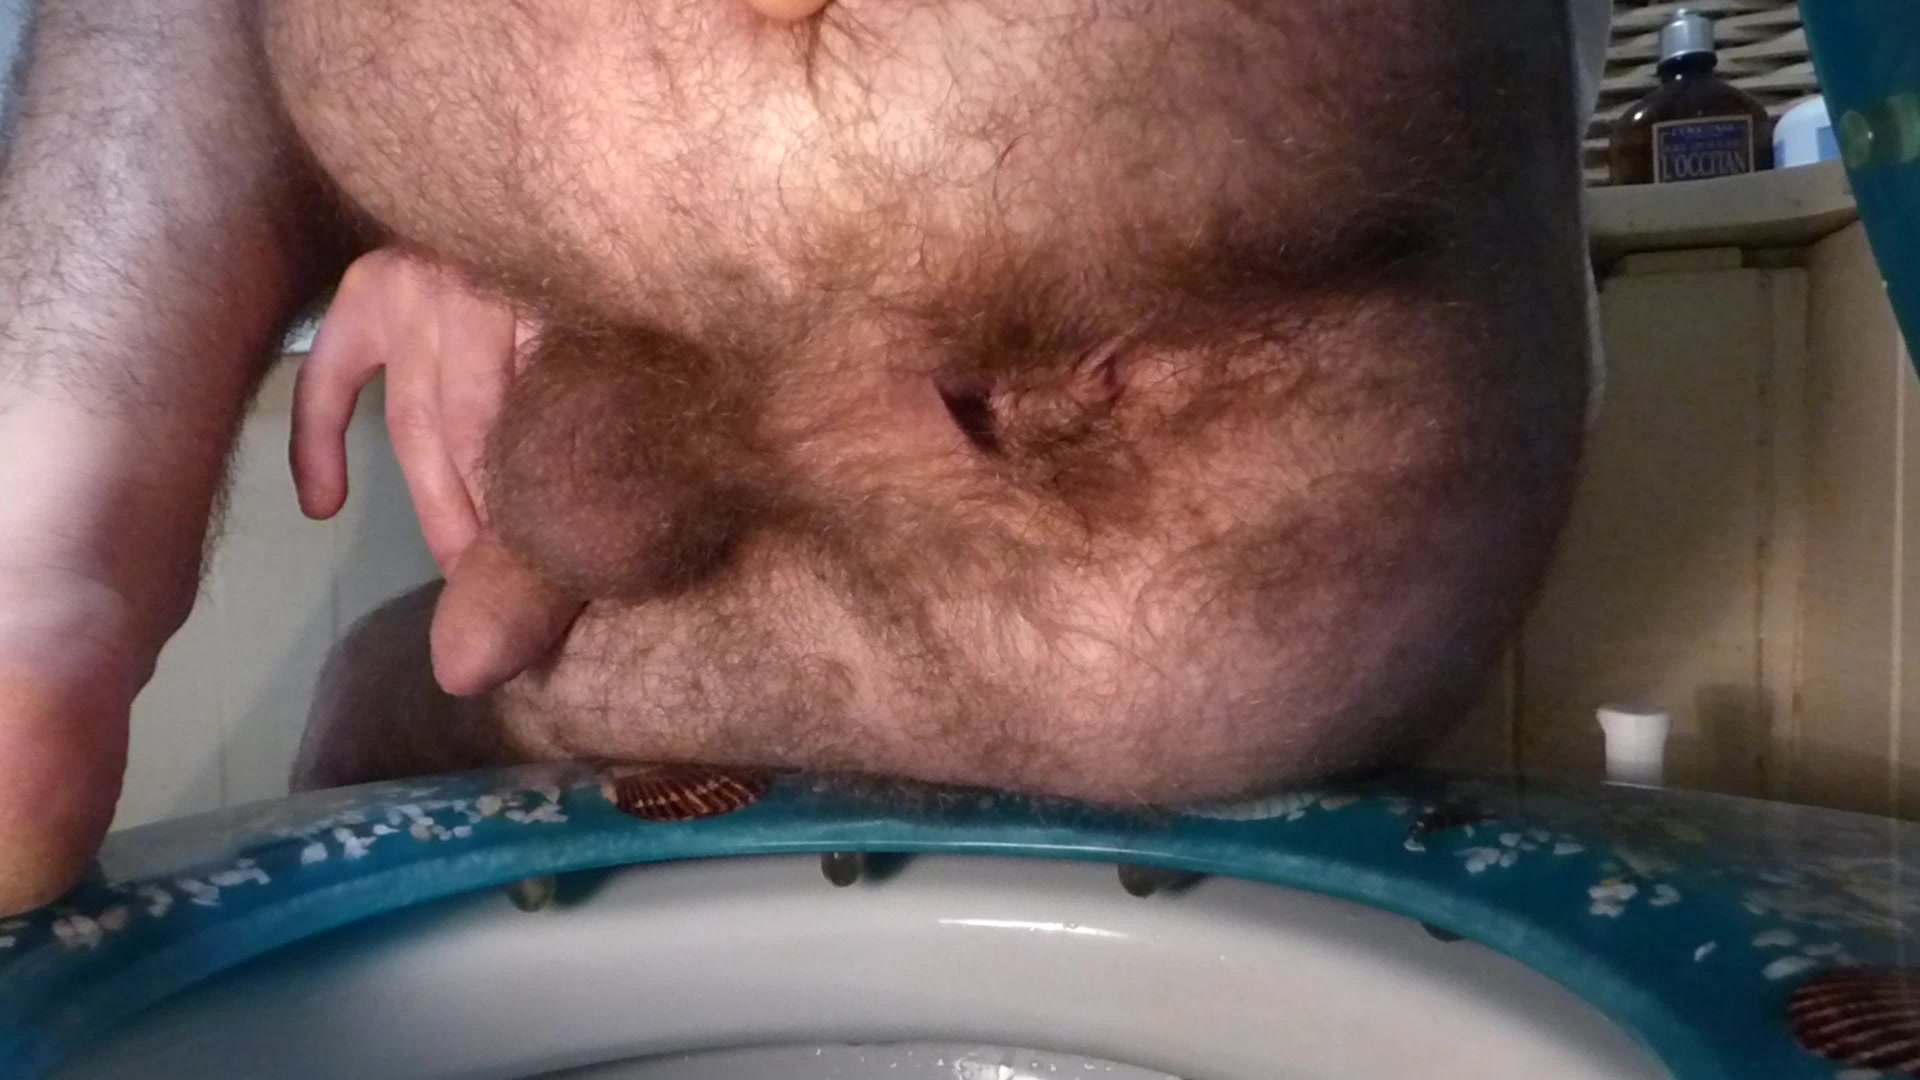 Shitting on the toilet - video 5